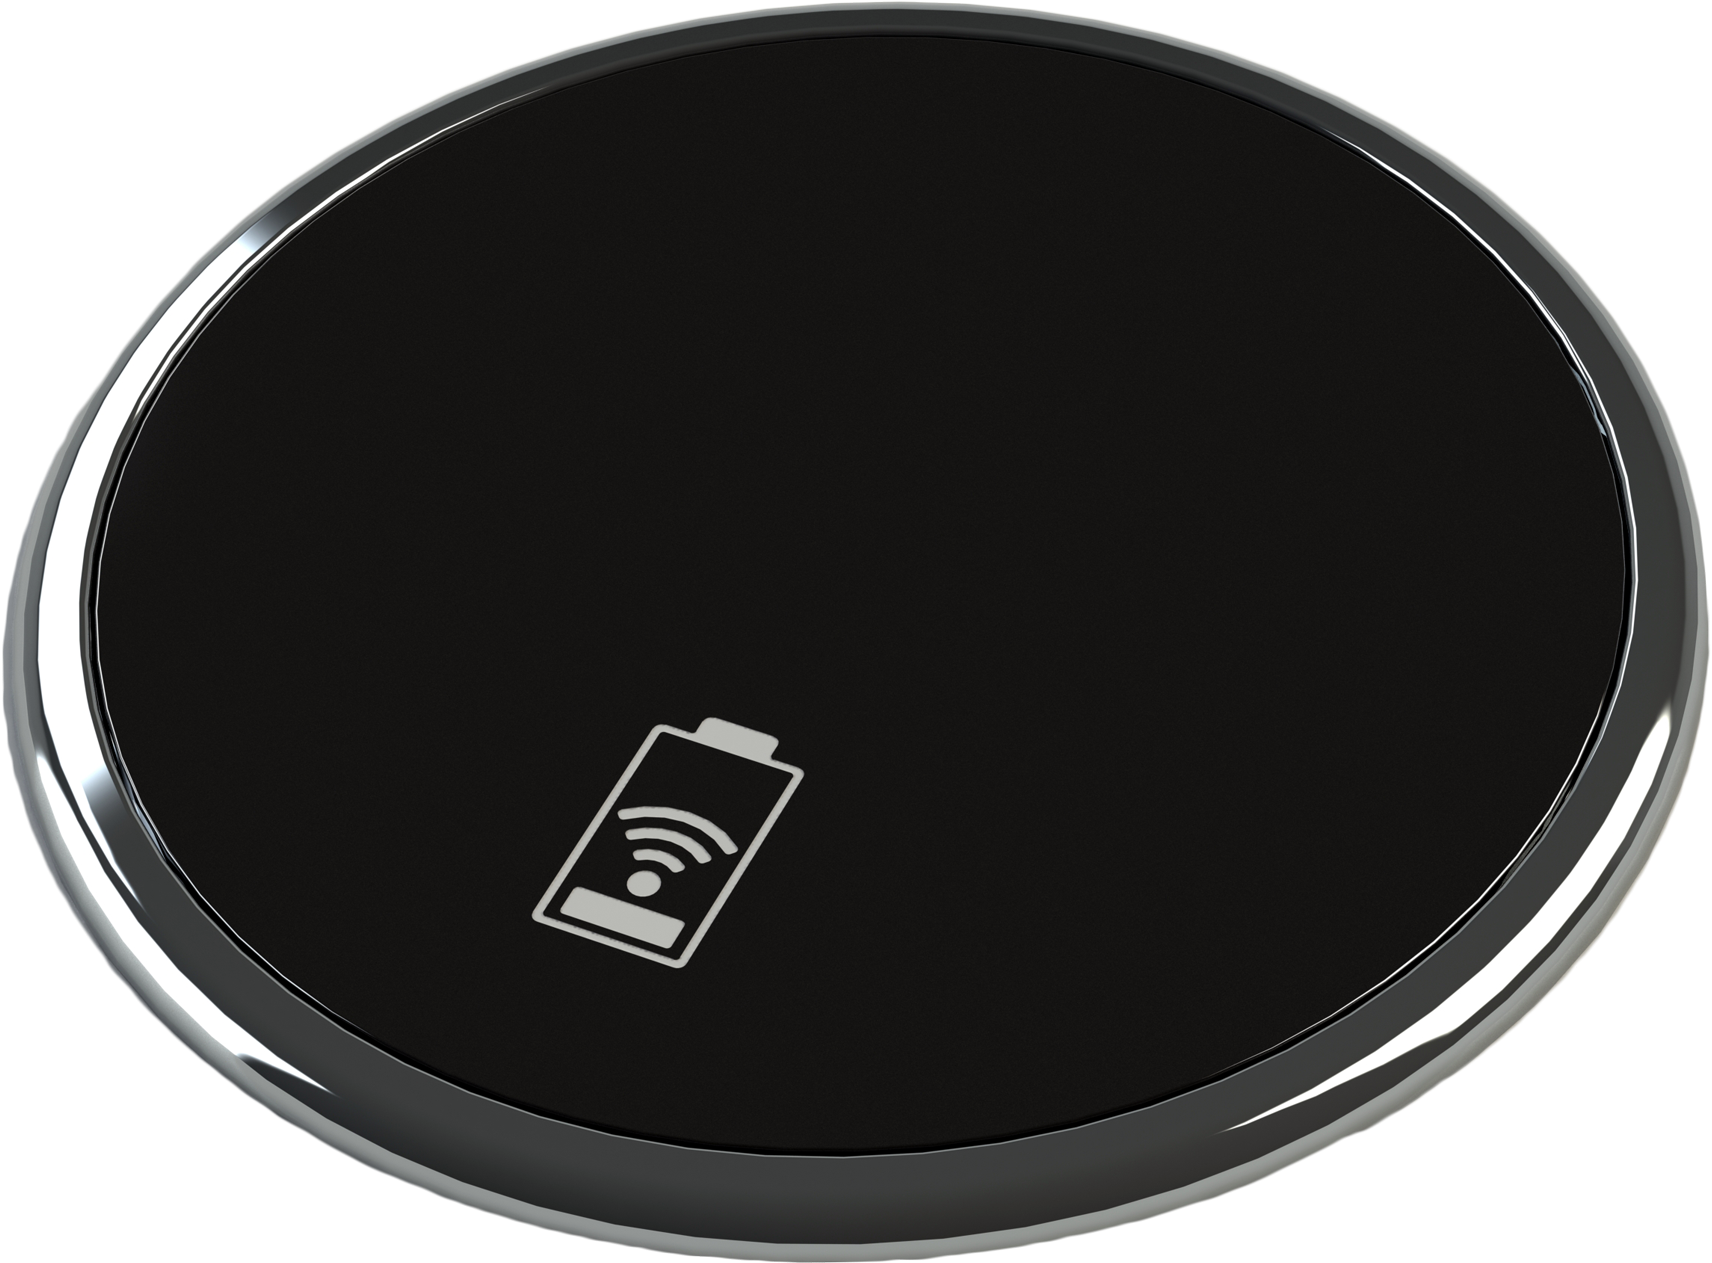 A Black Circular Object With A Battery Icon